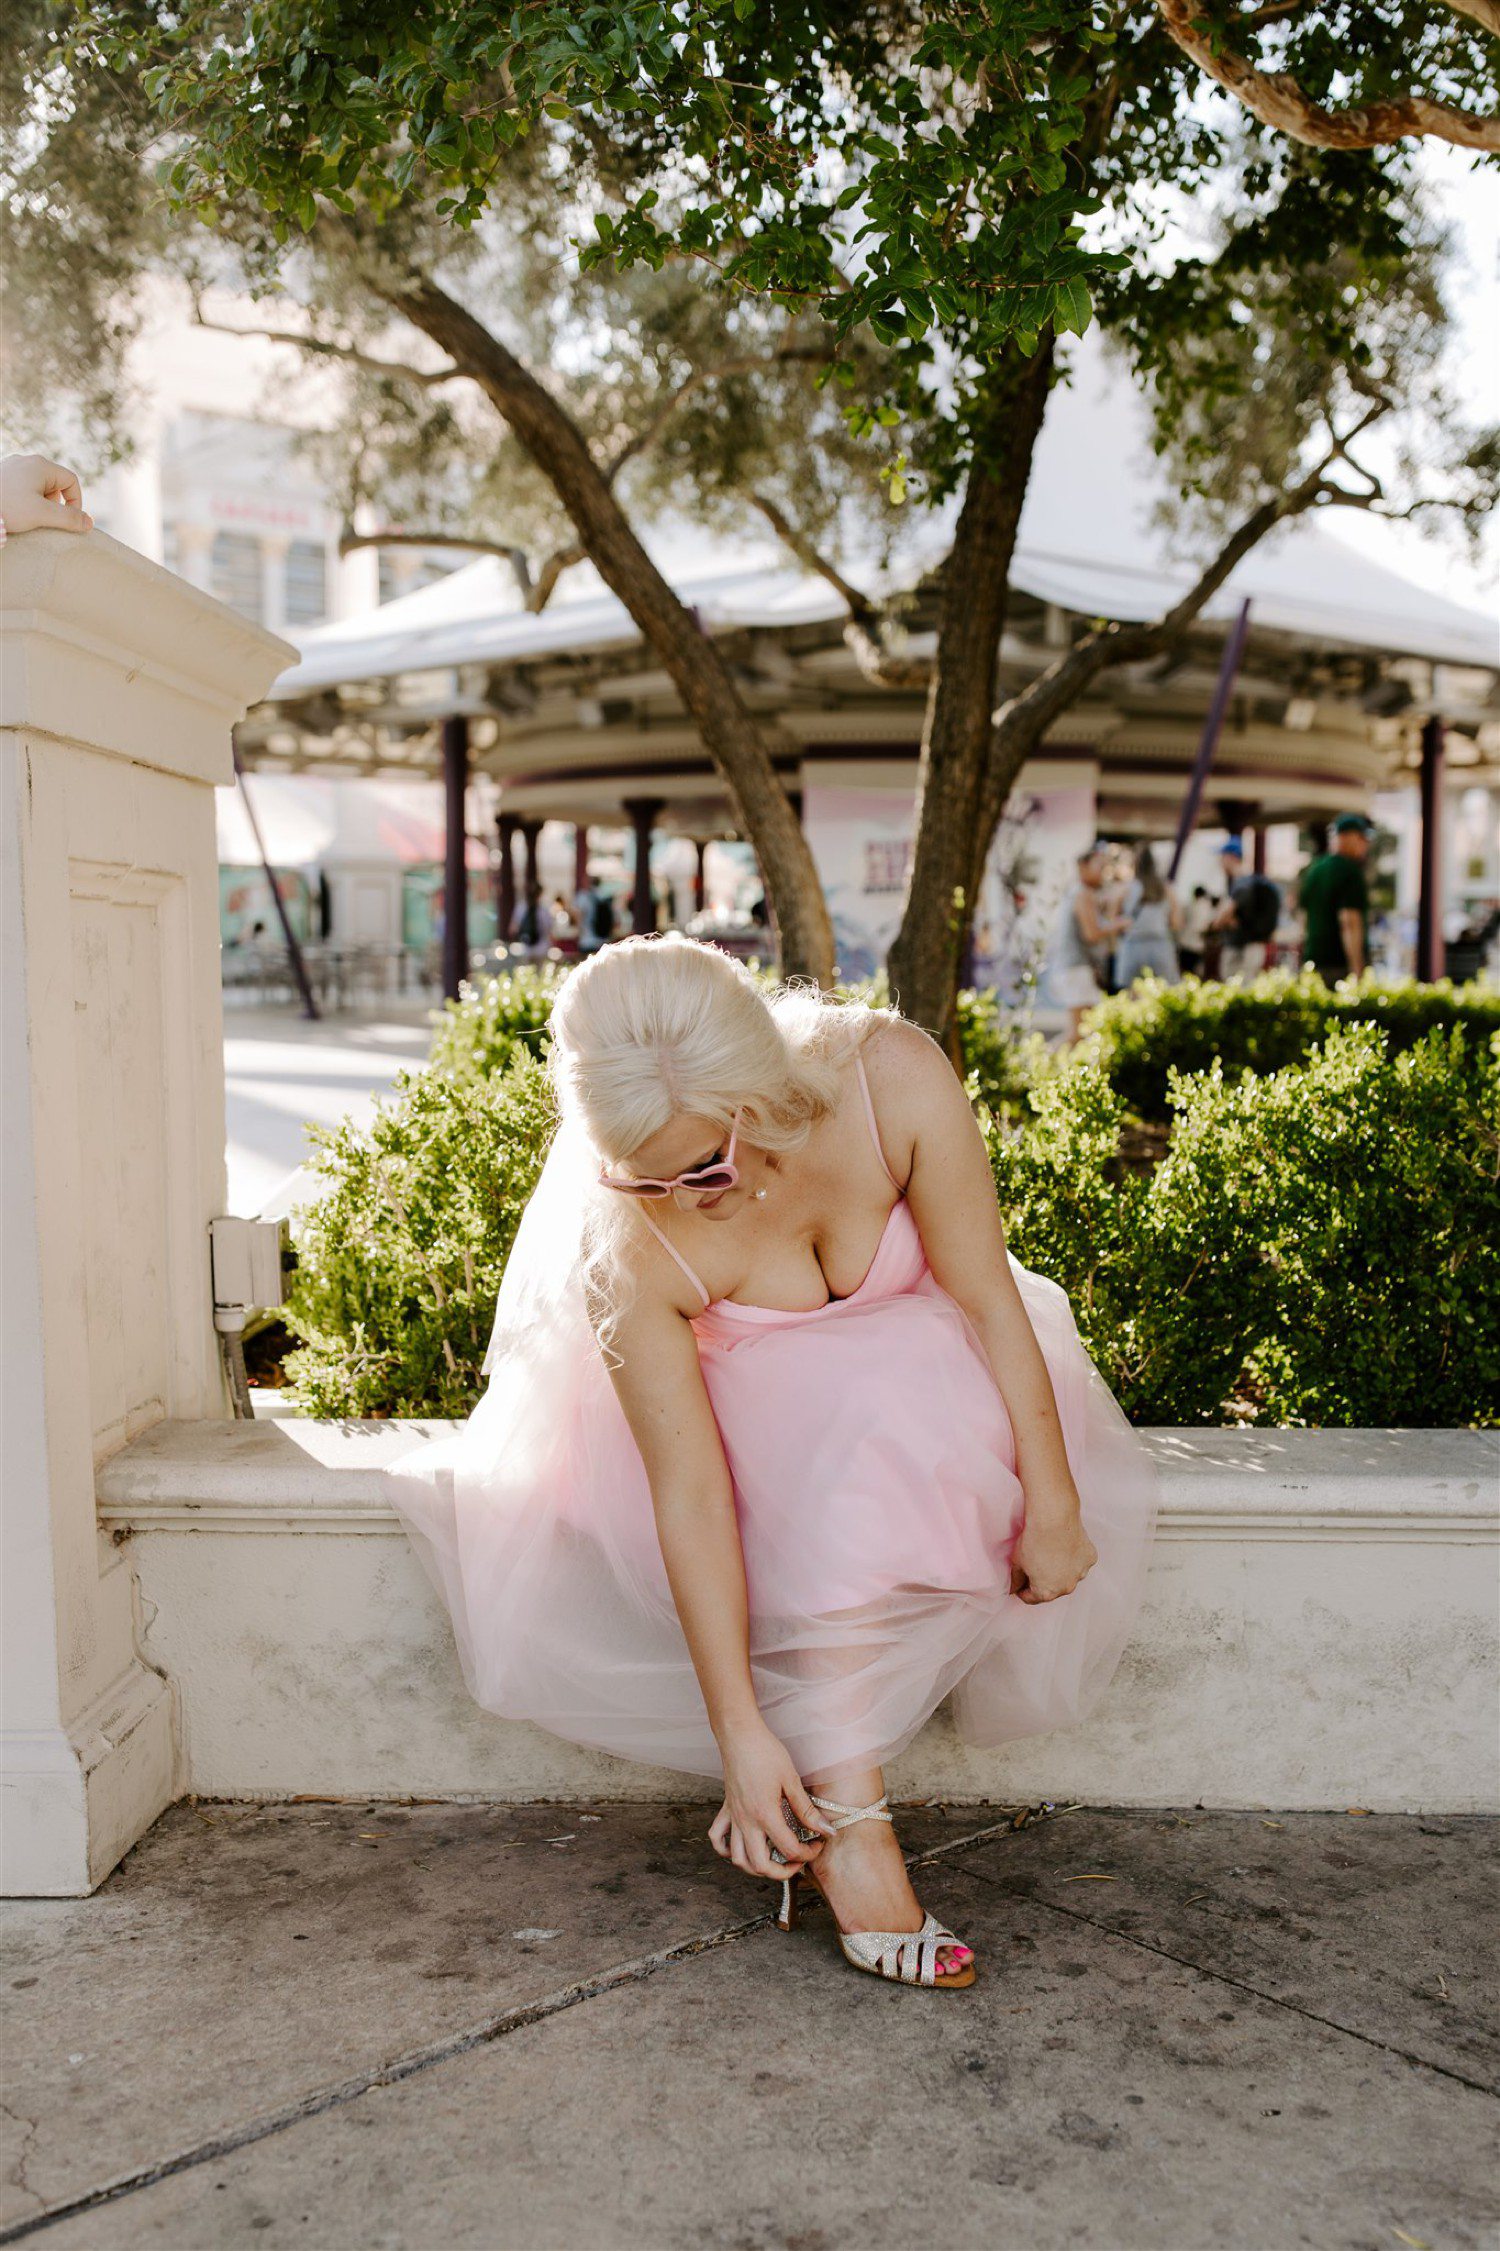 Bride wearing pink wedding dress with pink sunglasses.